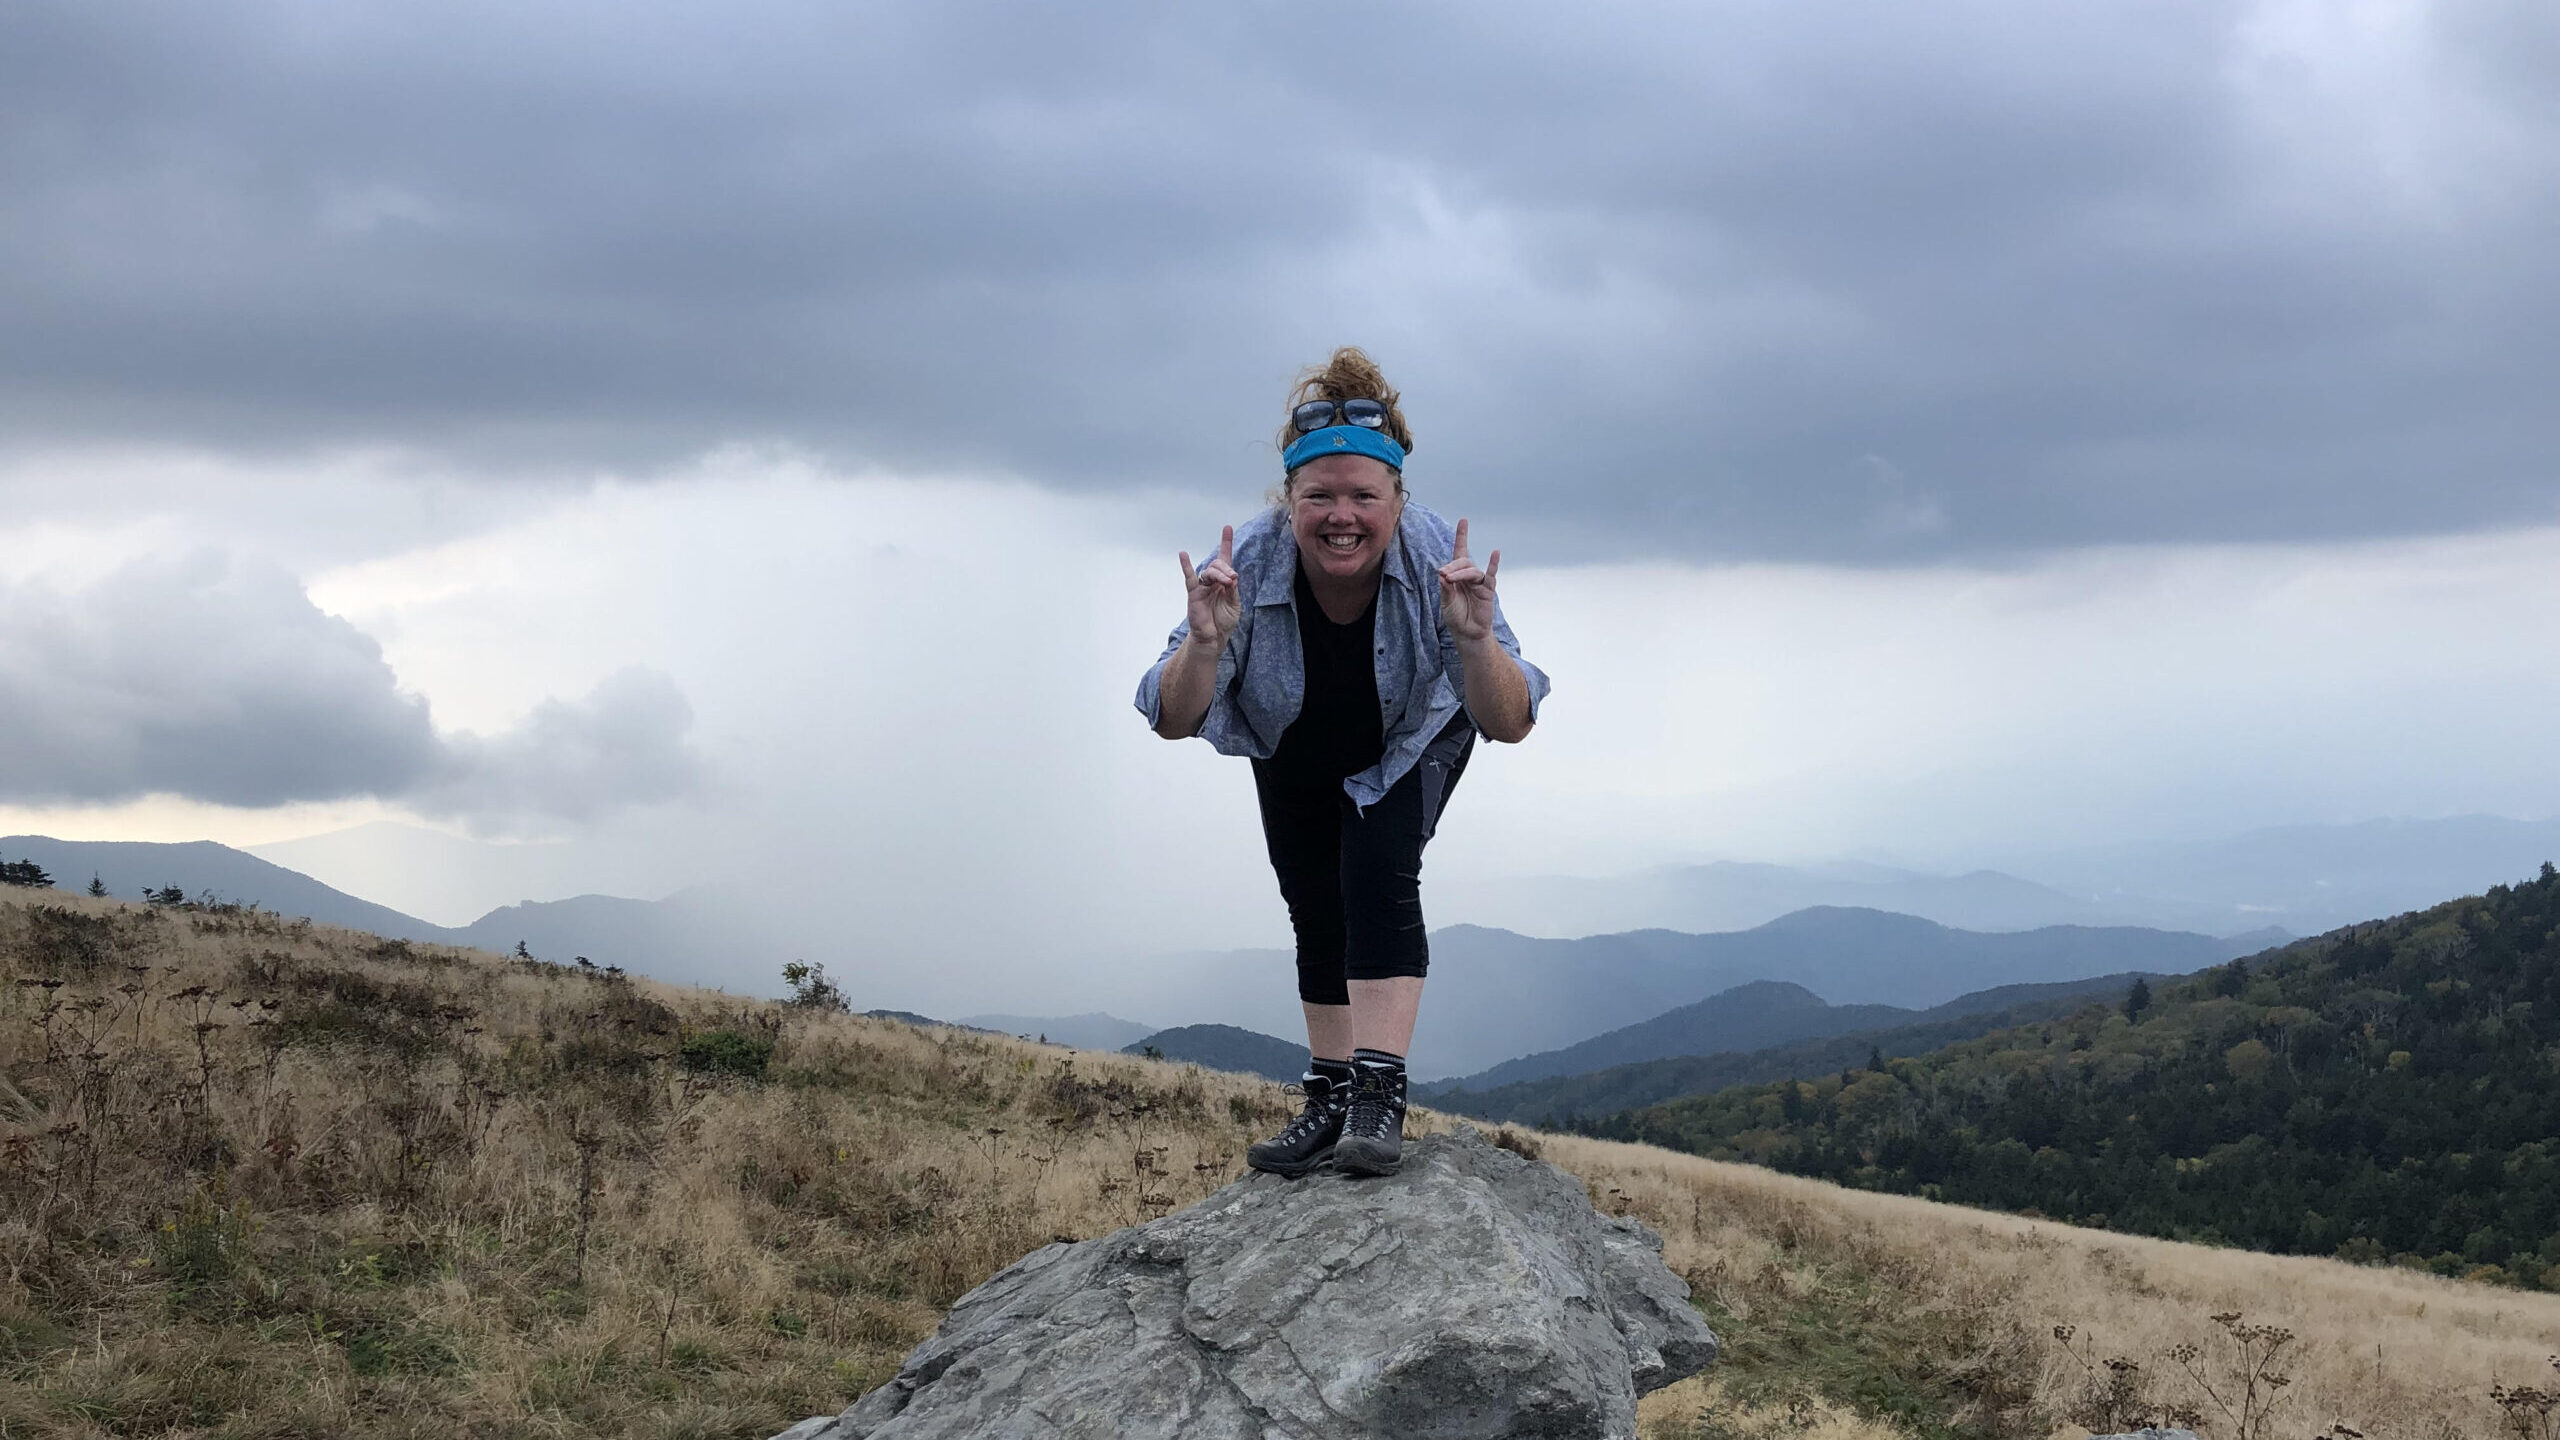 Erin on a Rock - Faculty Feature: Meet Erin Seekamp - Parks, Recreation and Tourism Management at NC State University